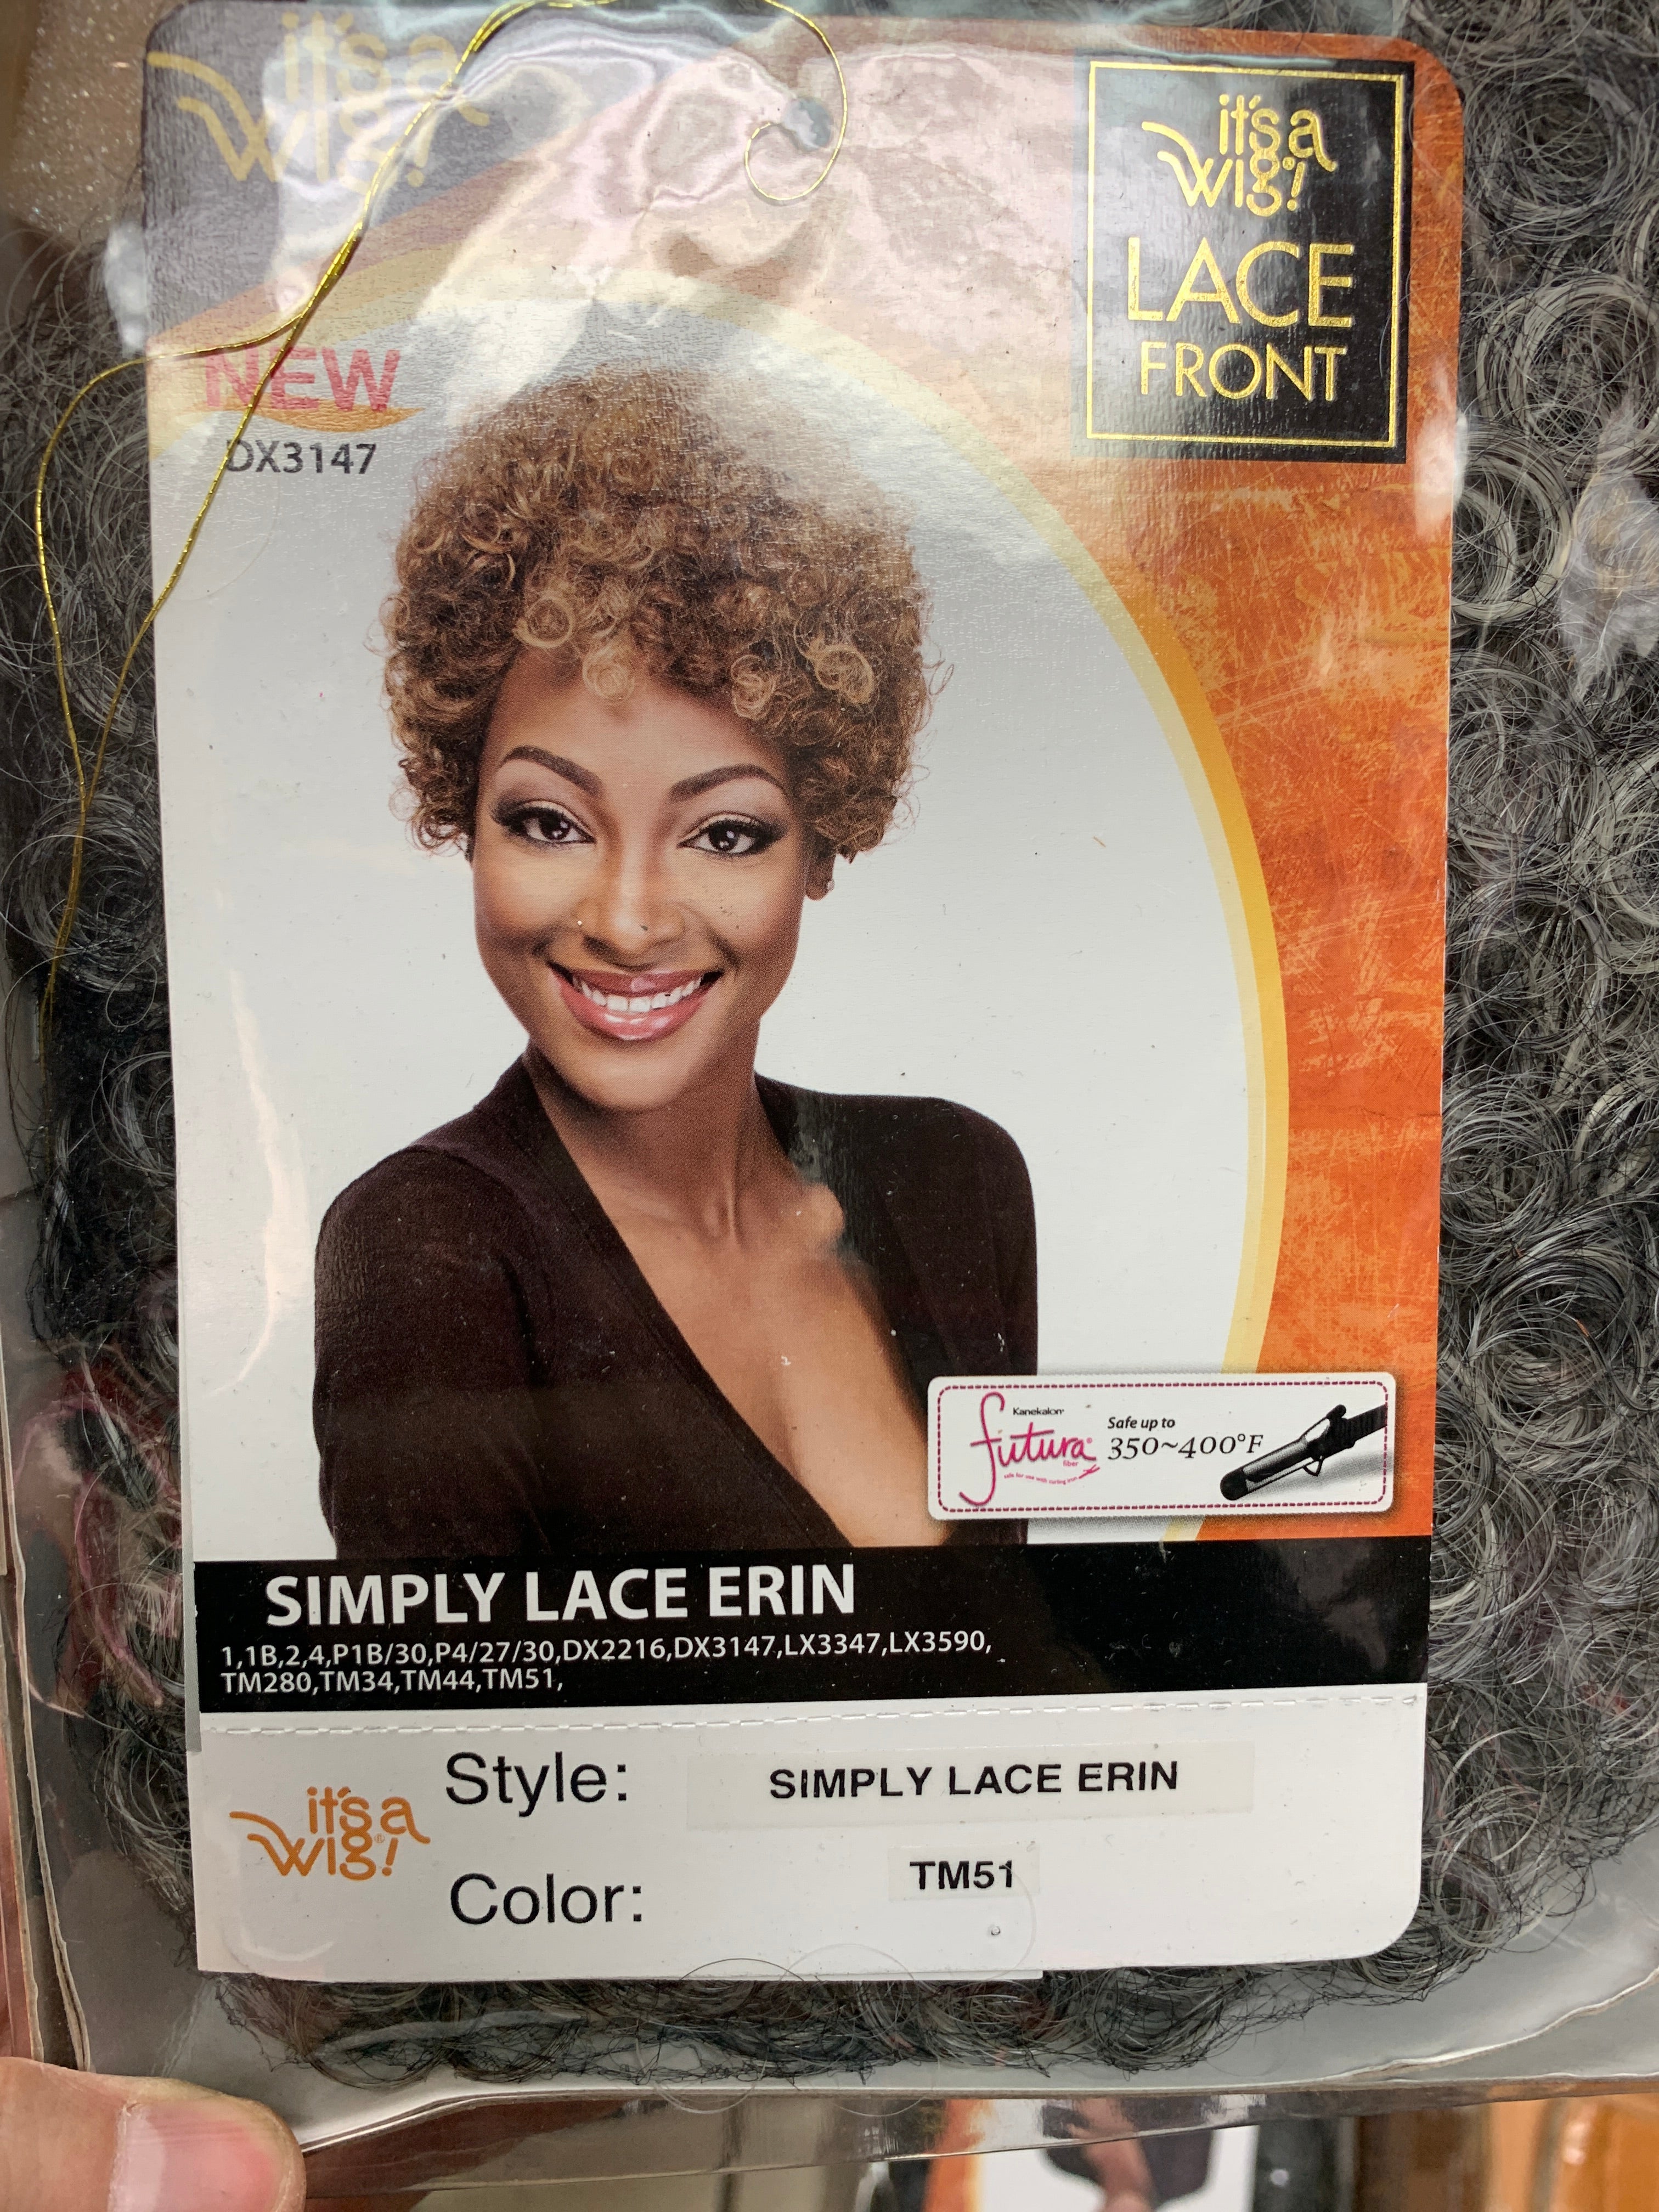 It’s a wig simple lace erin